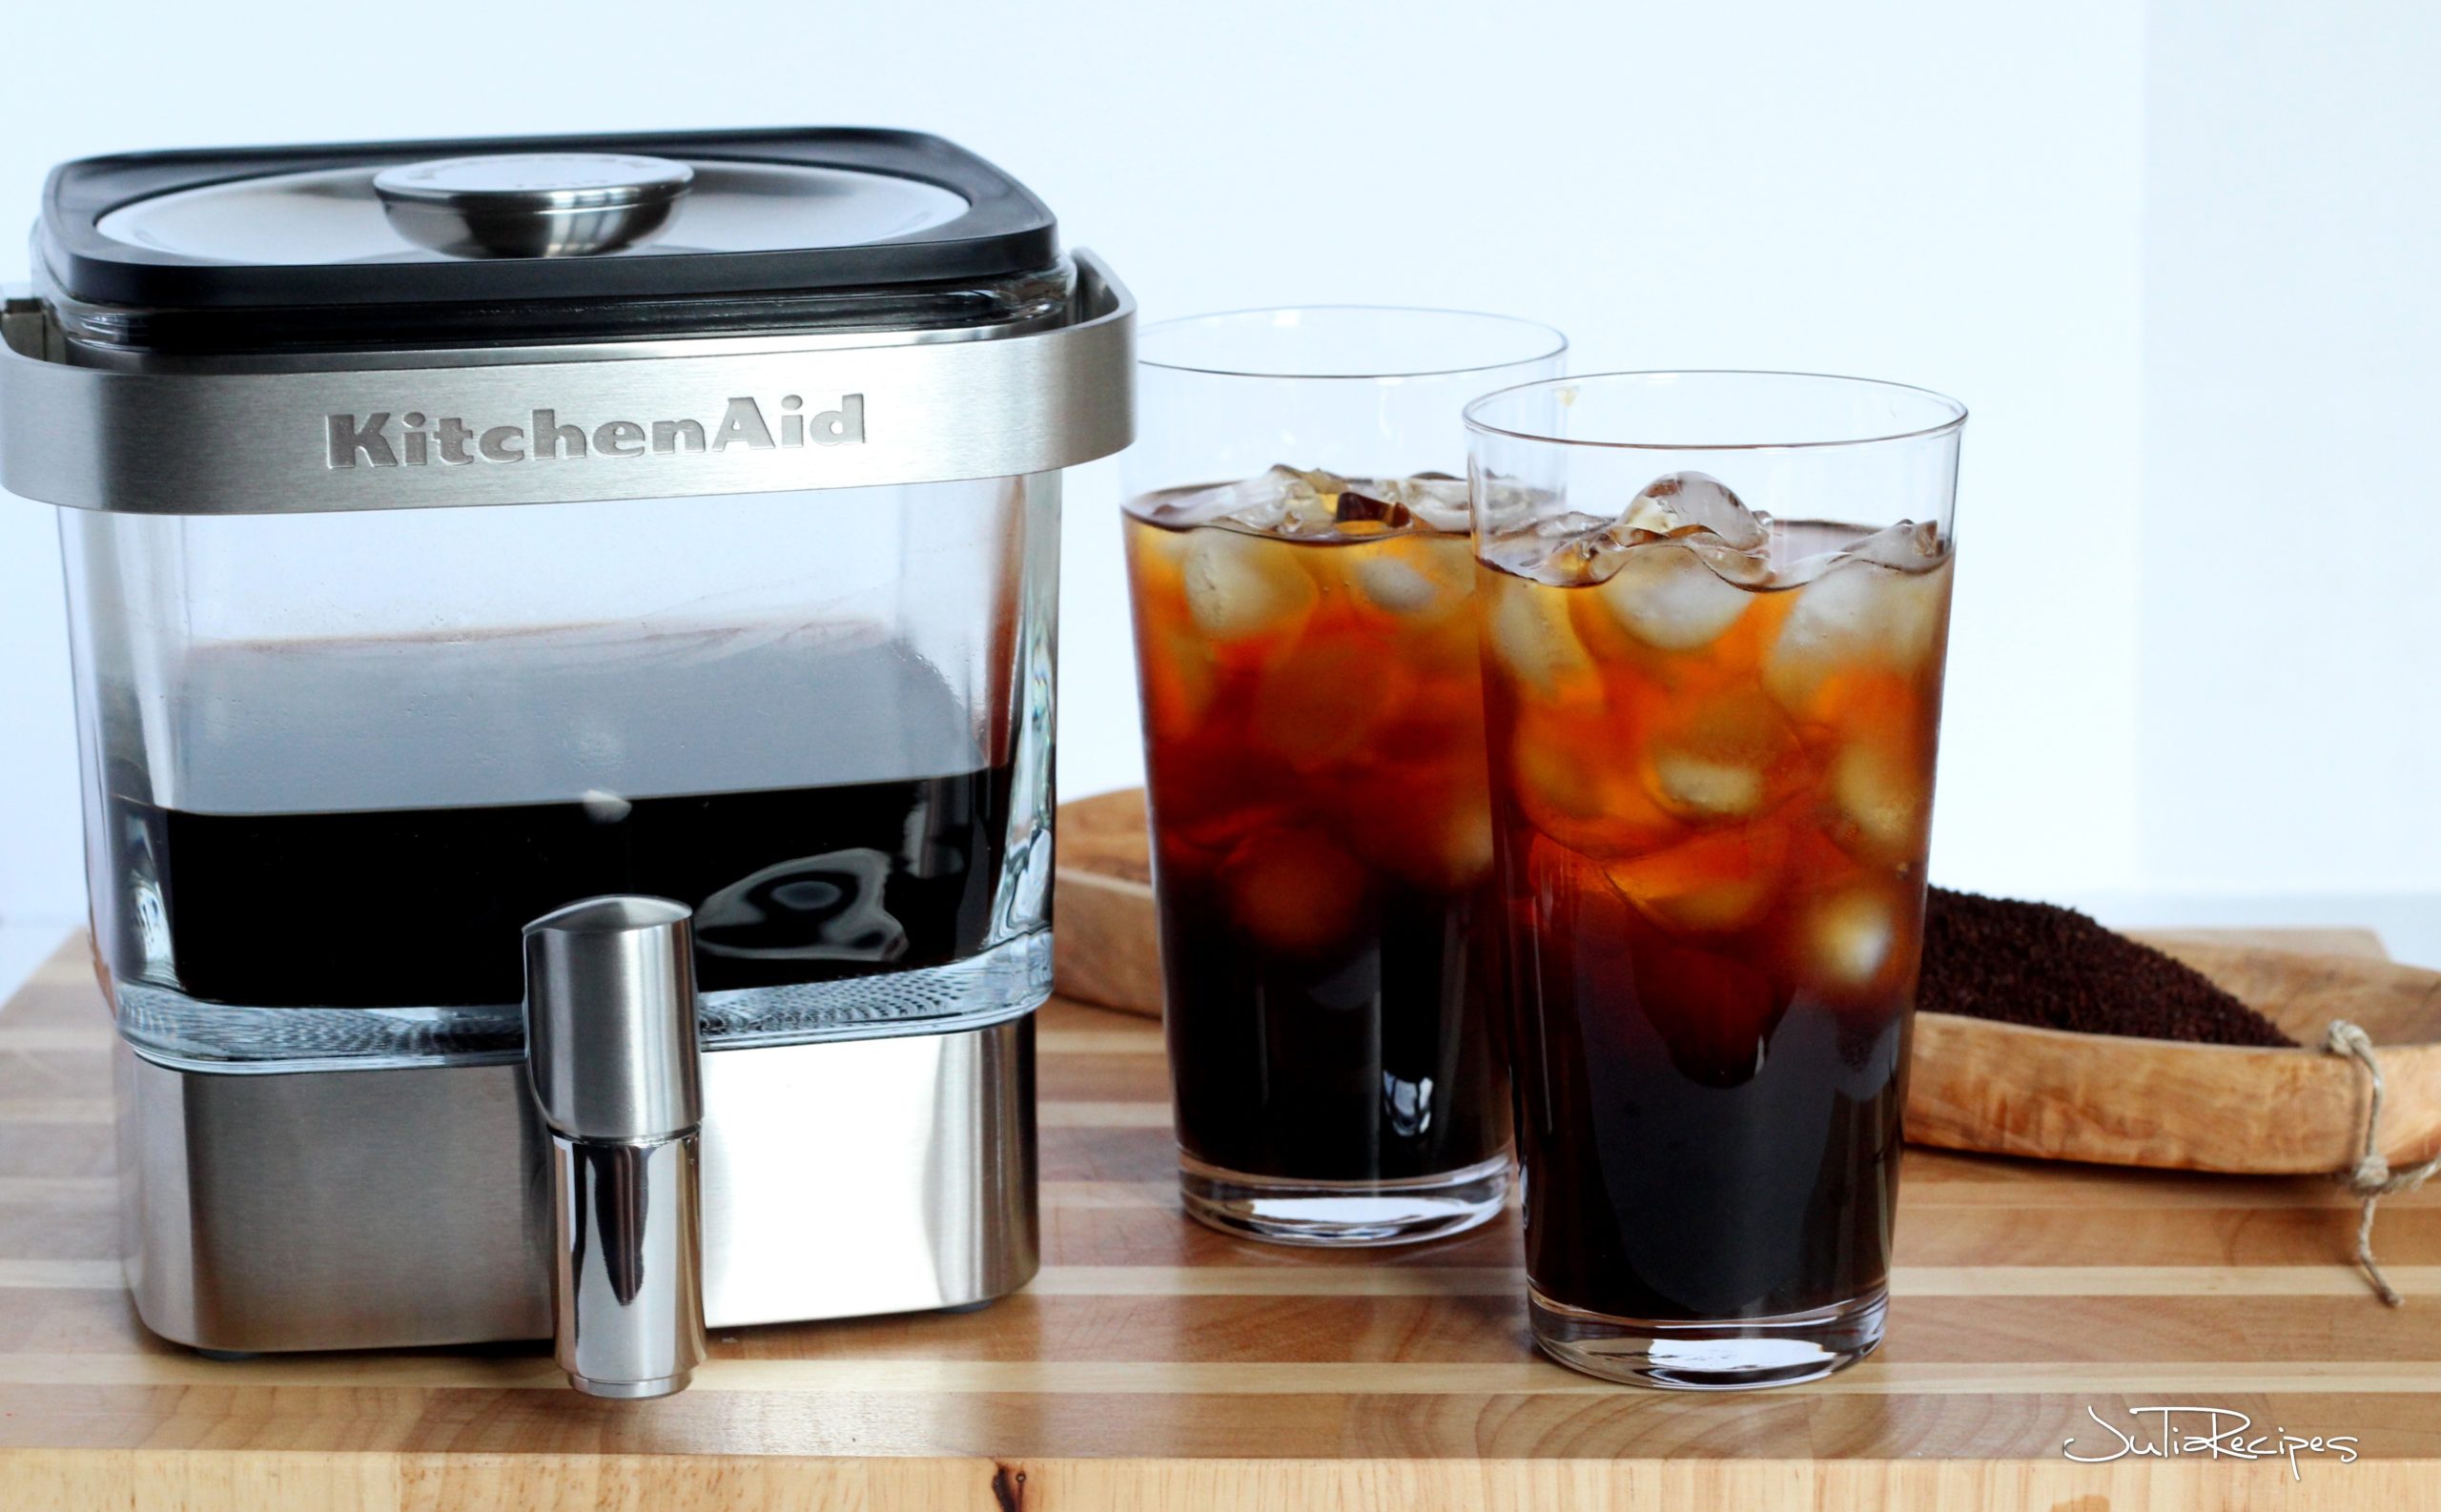 Making another batch of cold brew coffee in my @KitchenAid cold brew m, kitchen aid cold brew